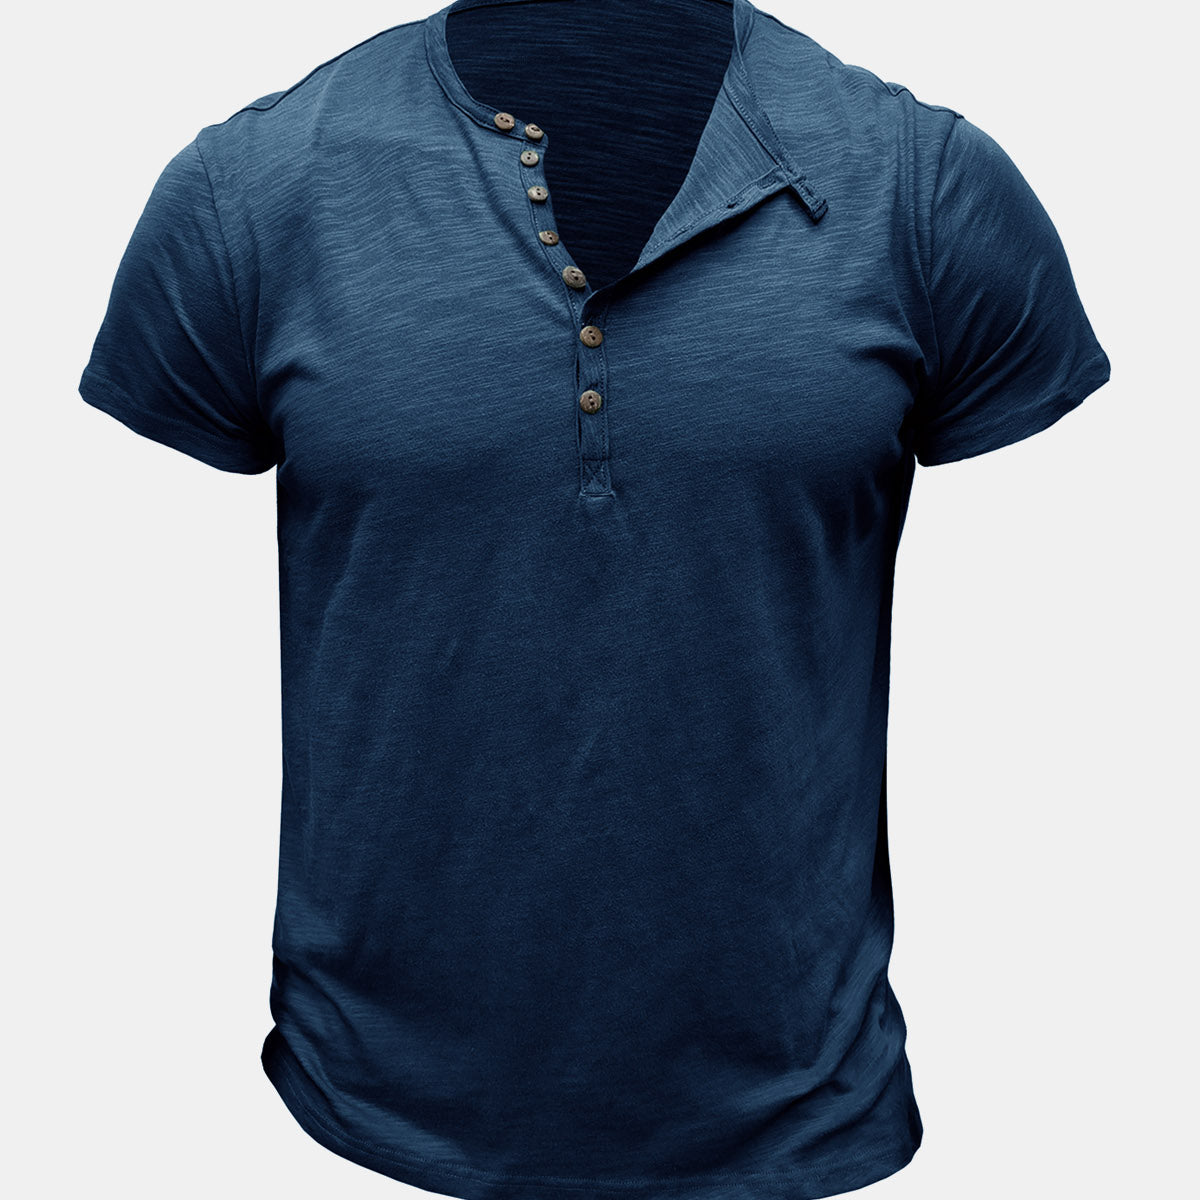 Men's Summer Casual Breathable Cotton Solid Color Short Sleeve T-Shirt